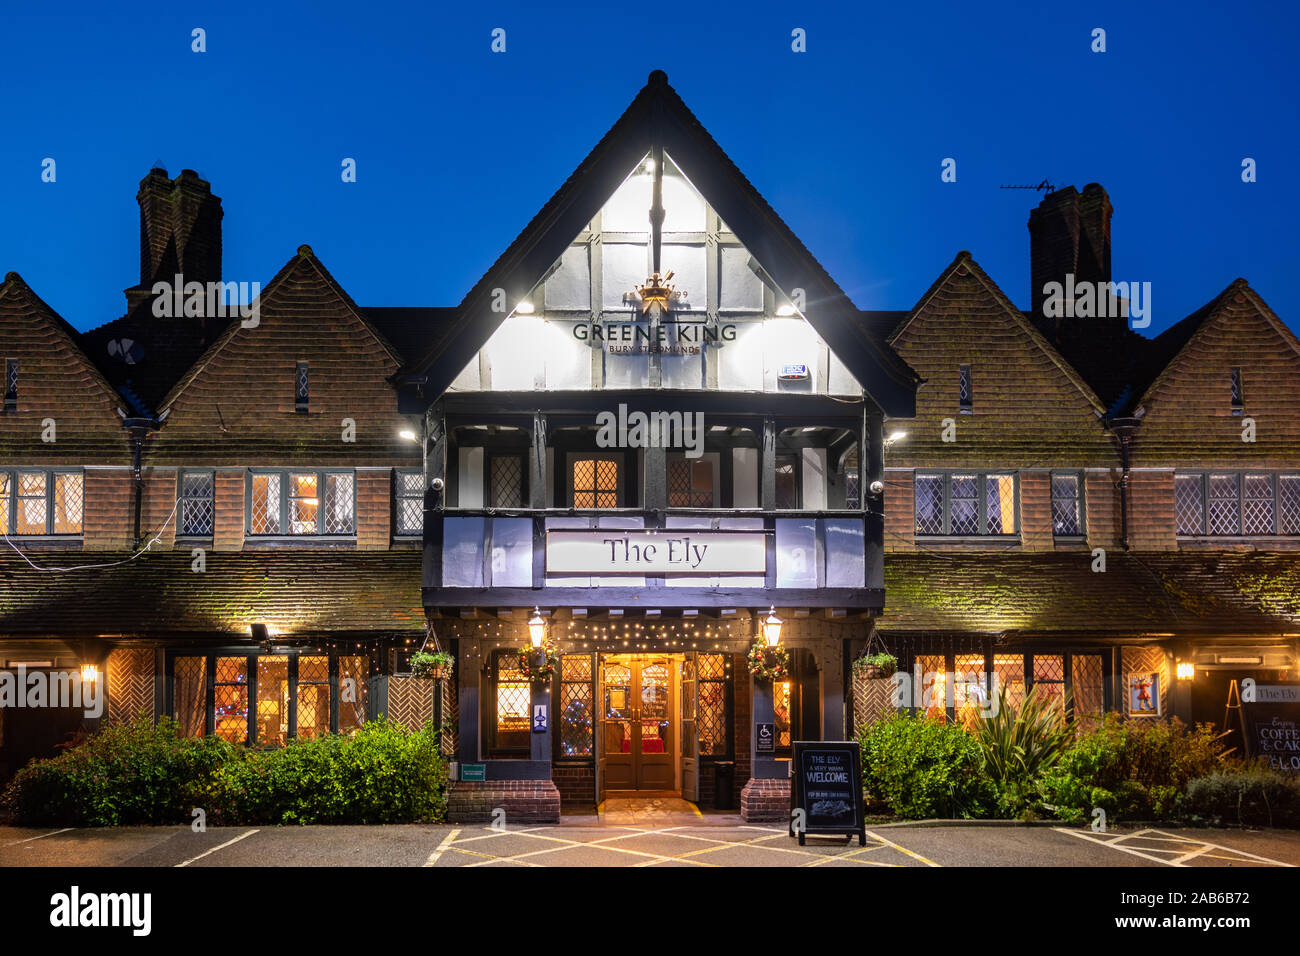 The Ely Hotel, night time exterior view with Christmas decorations, Blackwater, Hampshire, UK Stock Photo